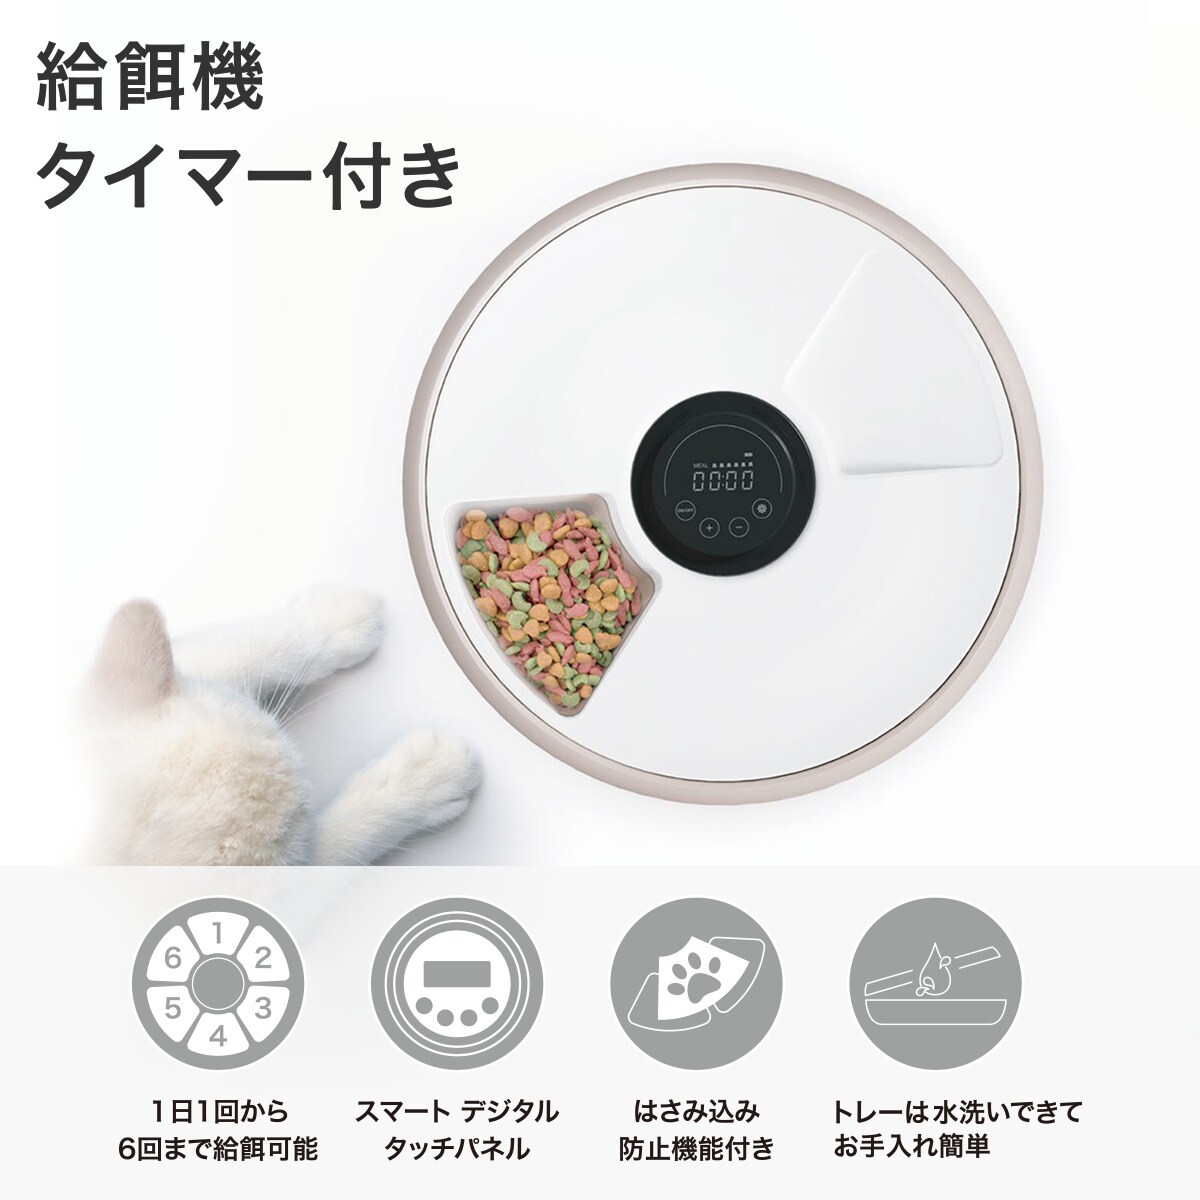 6 meal minute for pets timer type automatic feeder nitoli